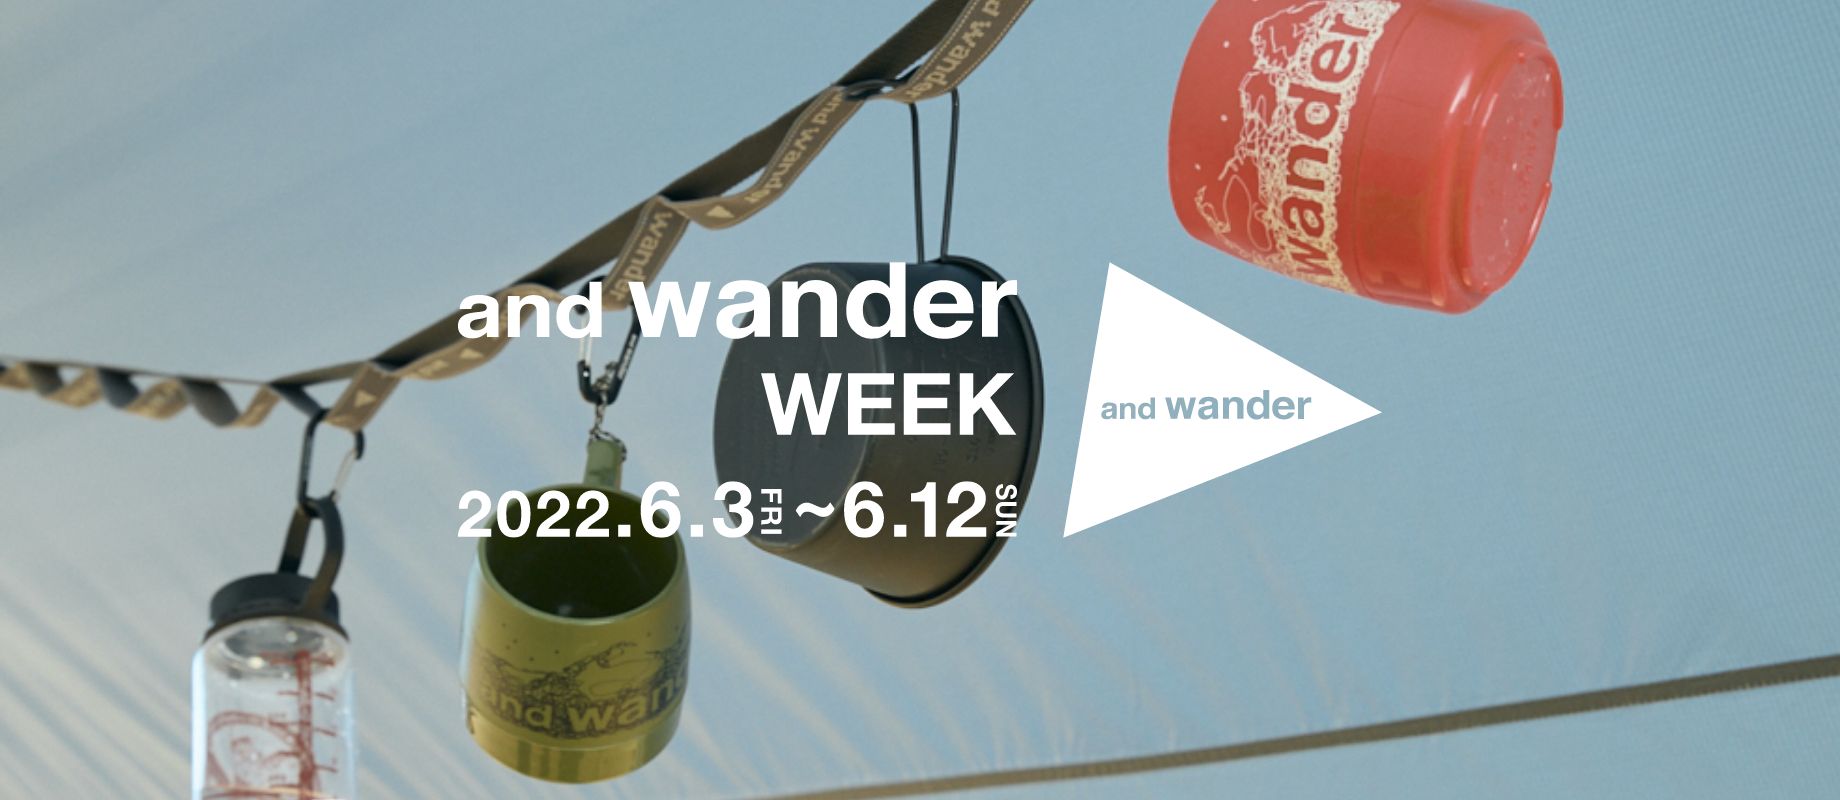 and wander WEEKを開催します！